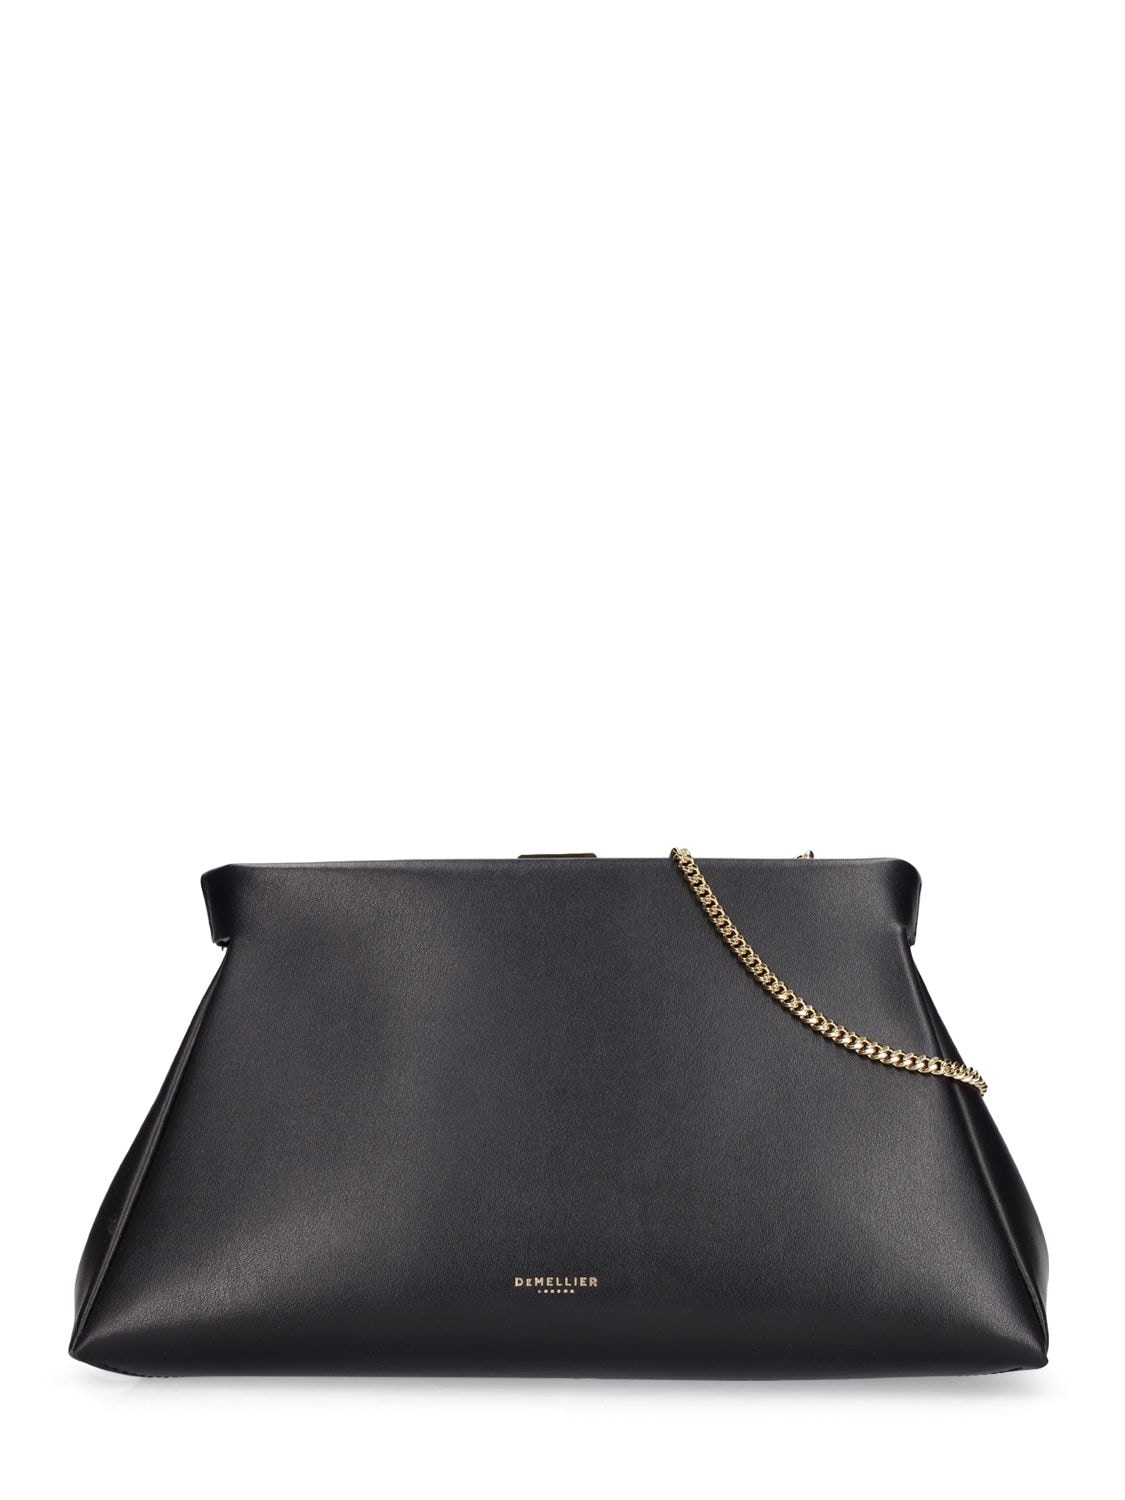 DEMELLIER Cannes Smooth Leather Clutch